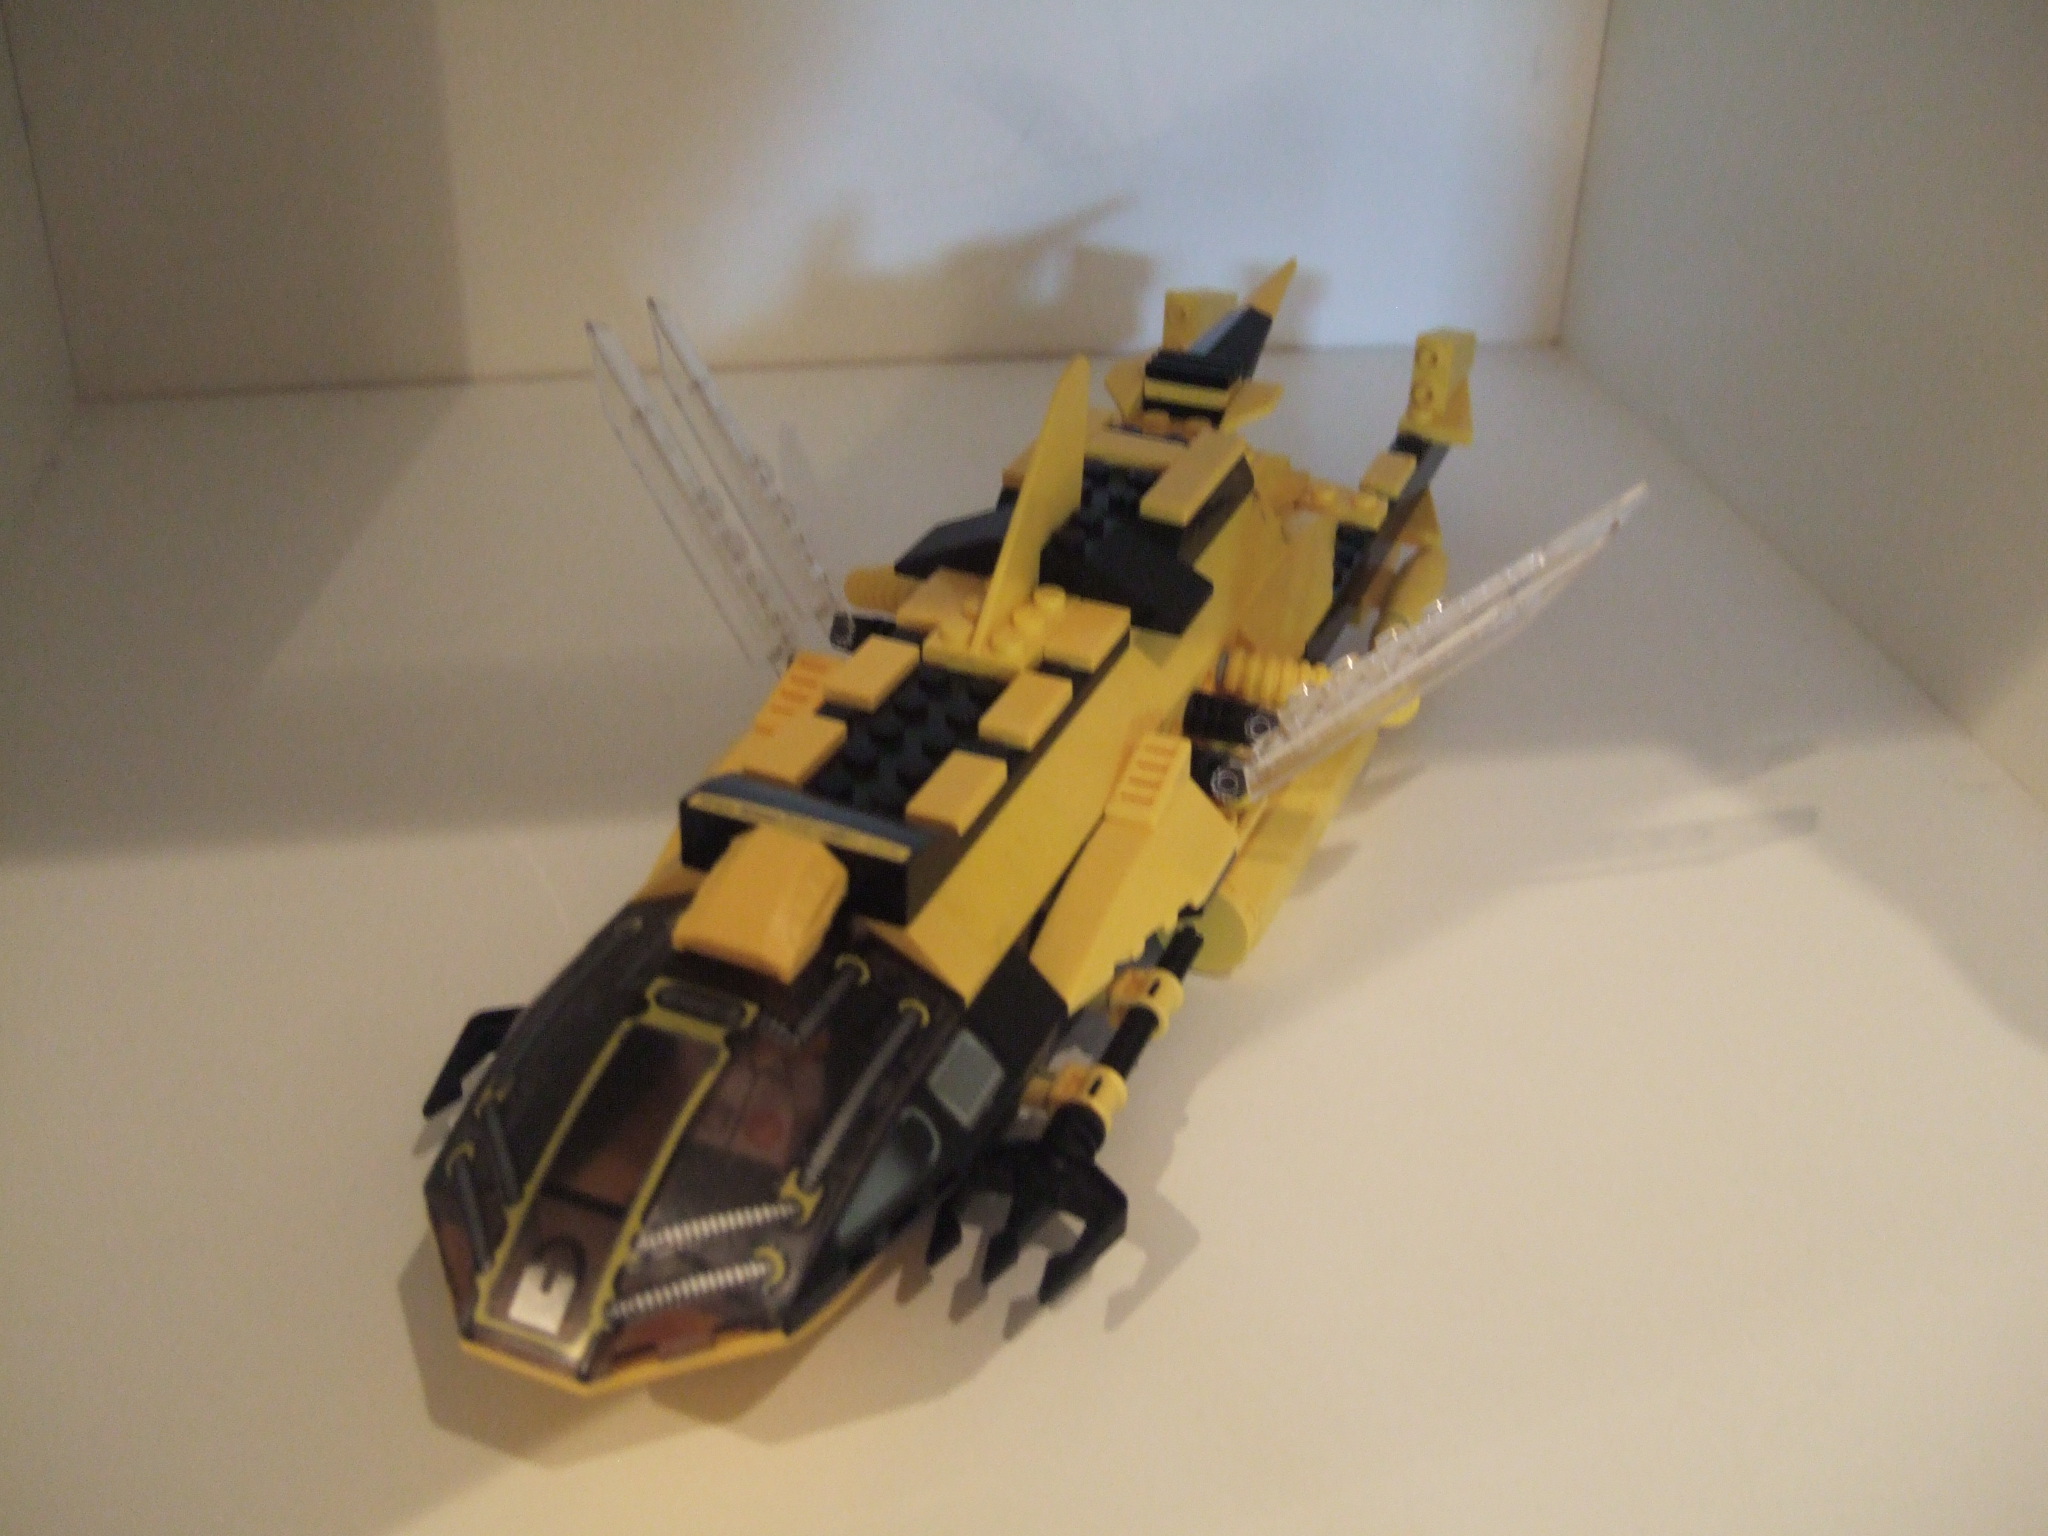 a lego yellow and black vehicle on display